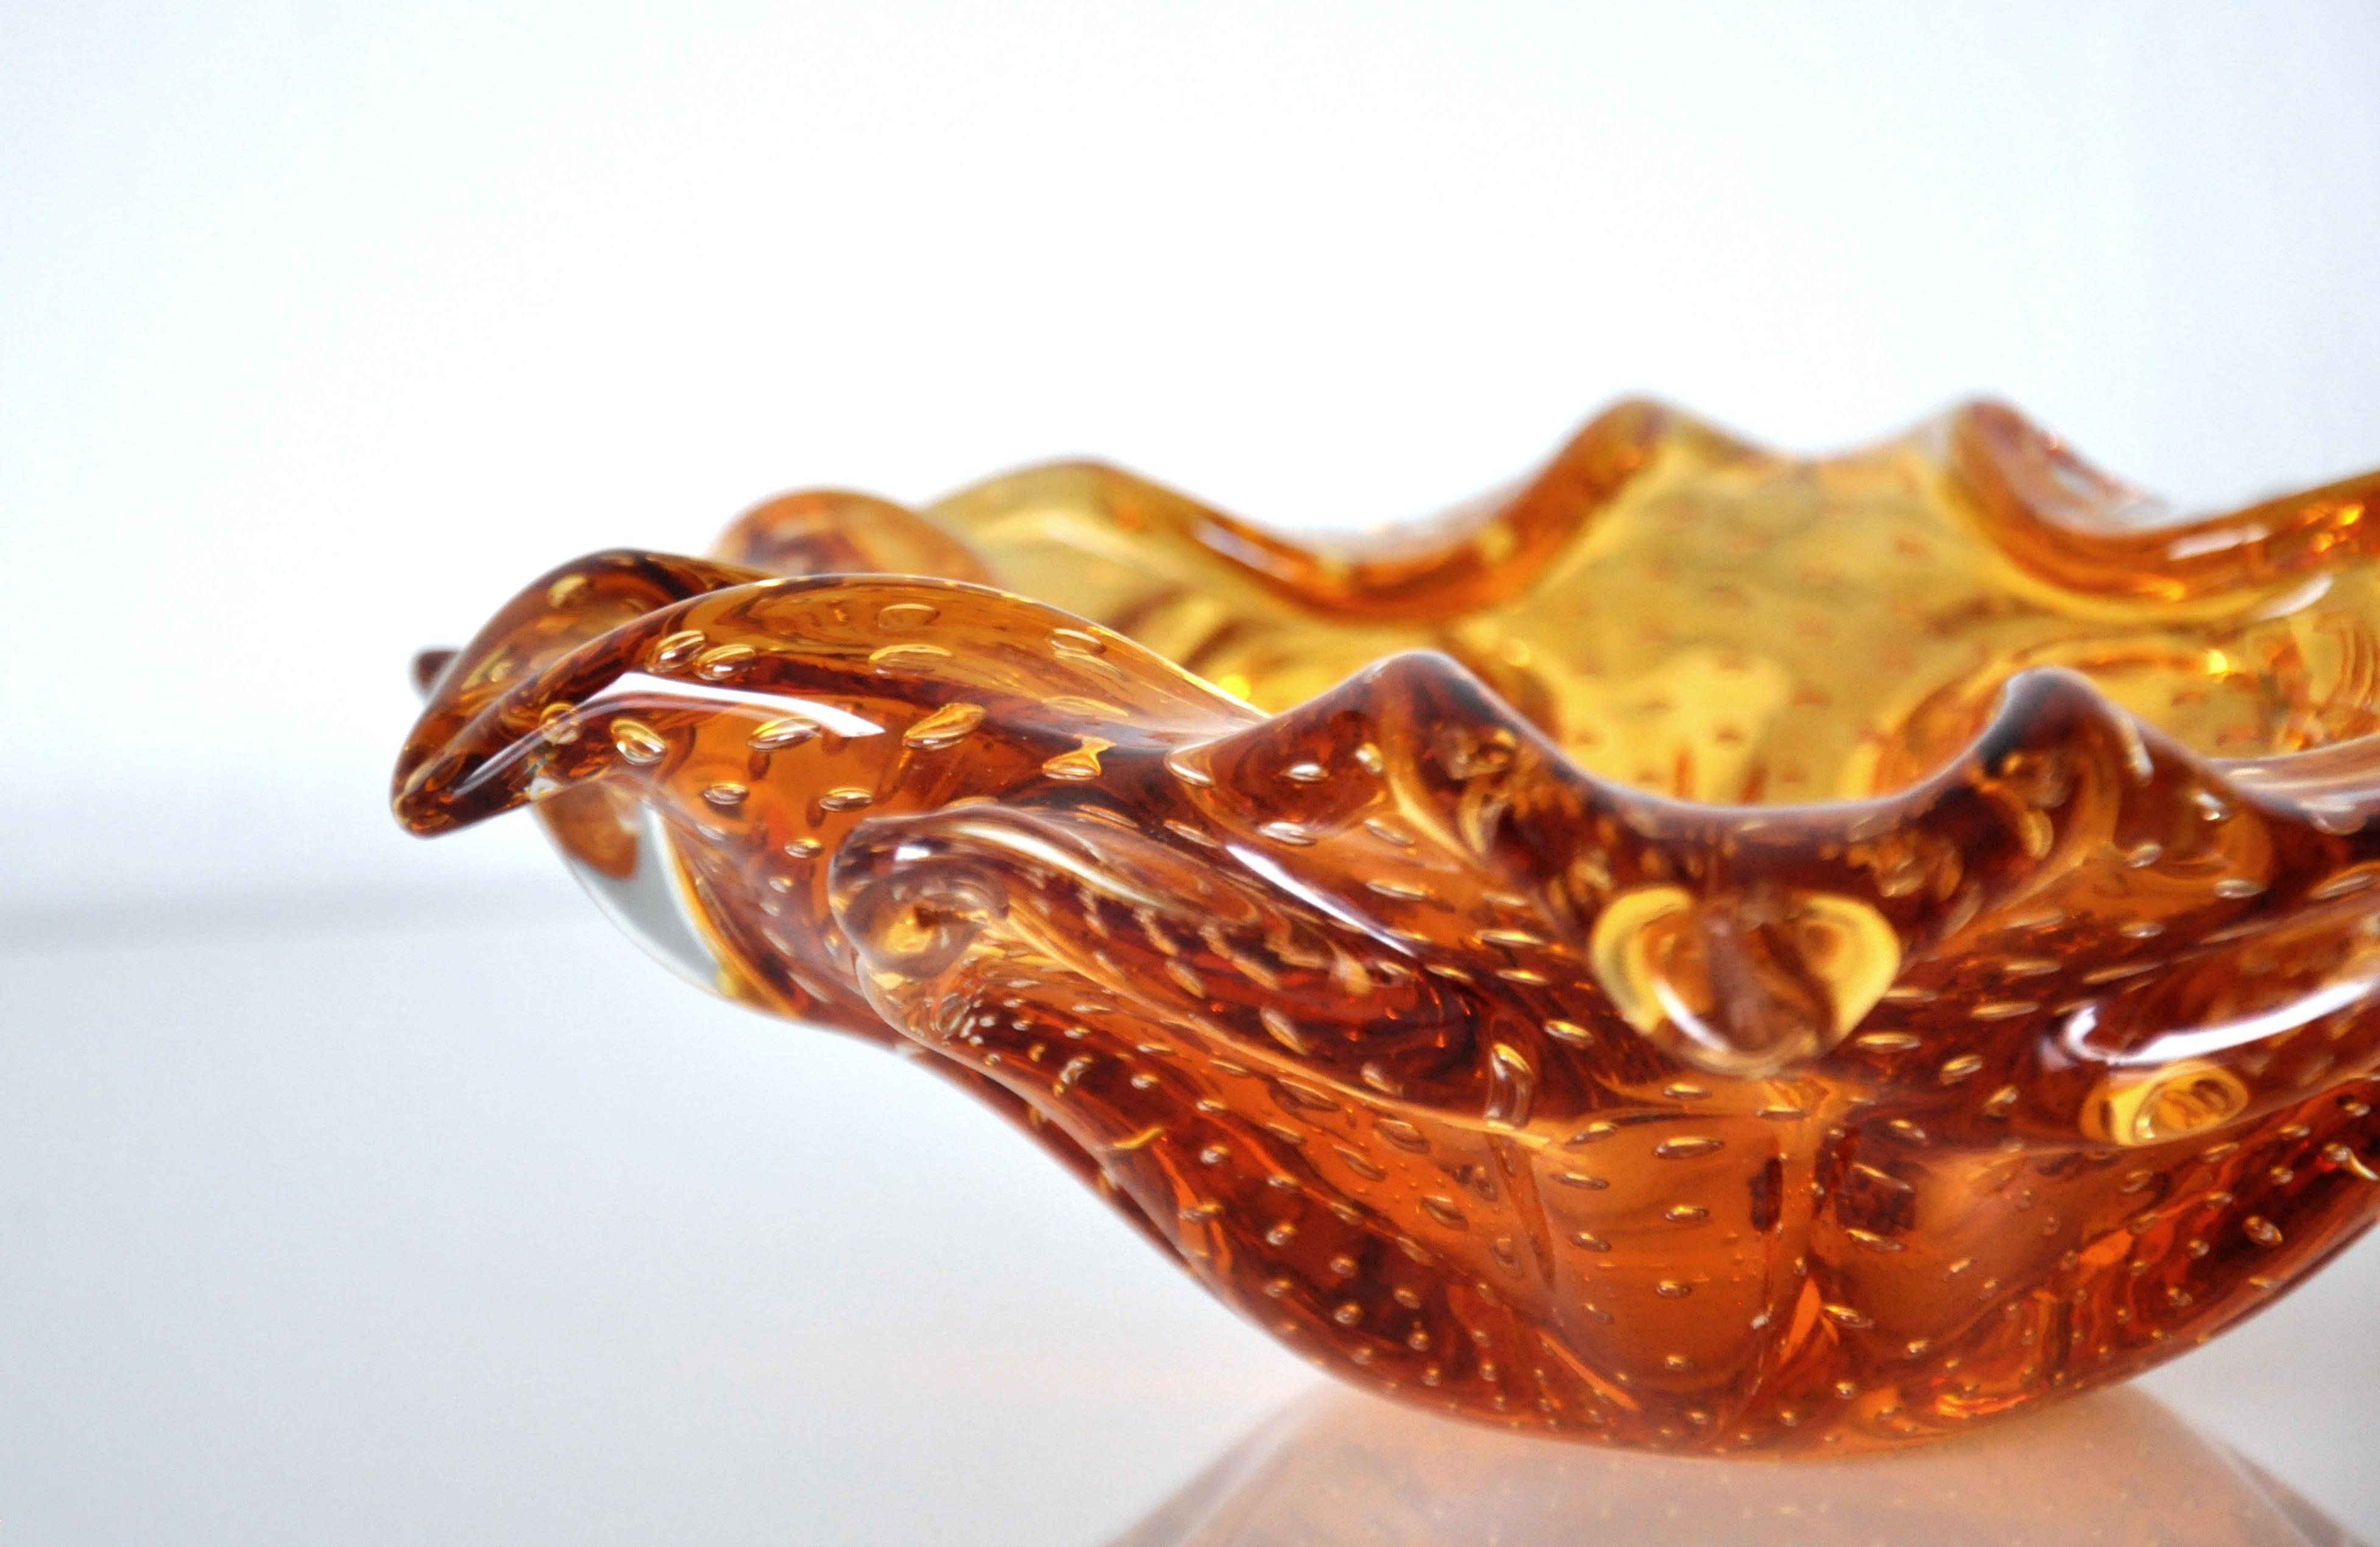 Vintage amber yellow Murano glass decorative bowl, vide-poche or cigar ashtray. Venetian hand blown glass with controlled bubble design and organic floral form. The tango or tiger lily flower shaped catchall has pinched rims and flared sides. The